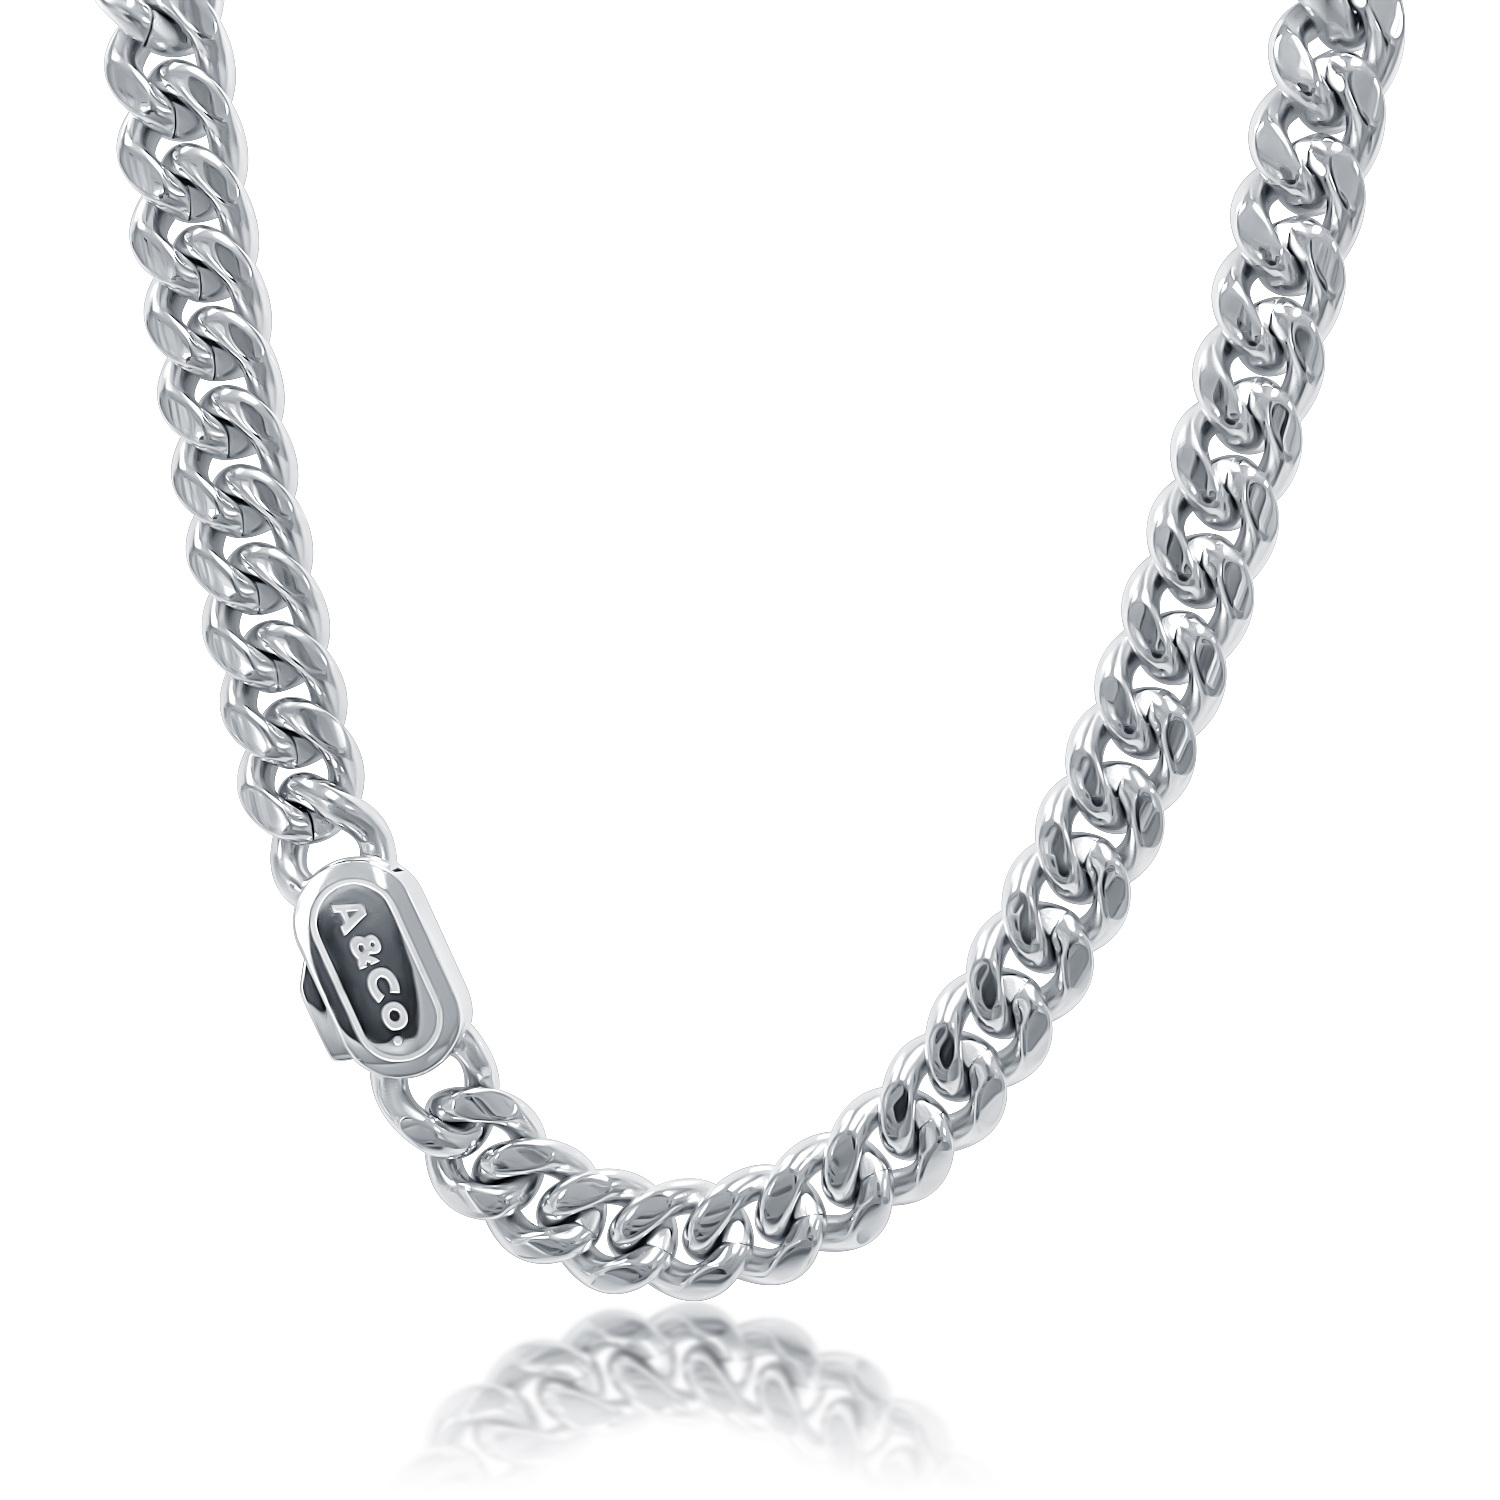 8mm Men's Stainless Steel Cuban Link Chain Necklace 20 Inches / Silver